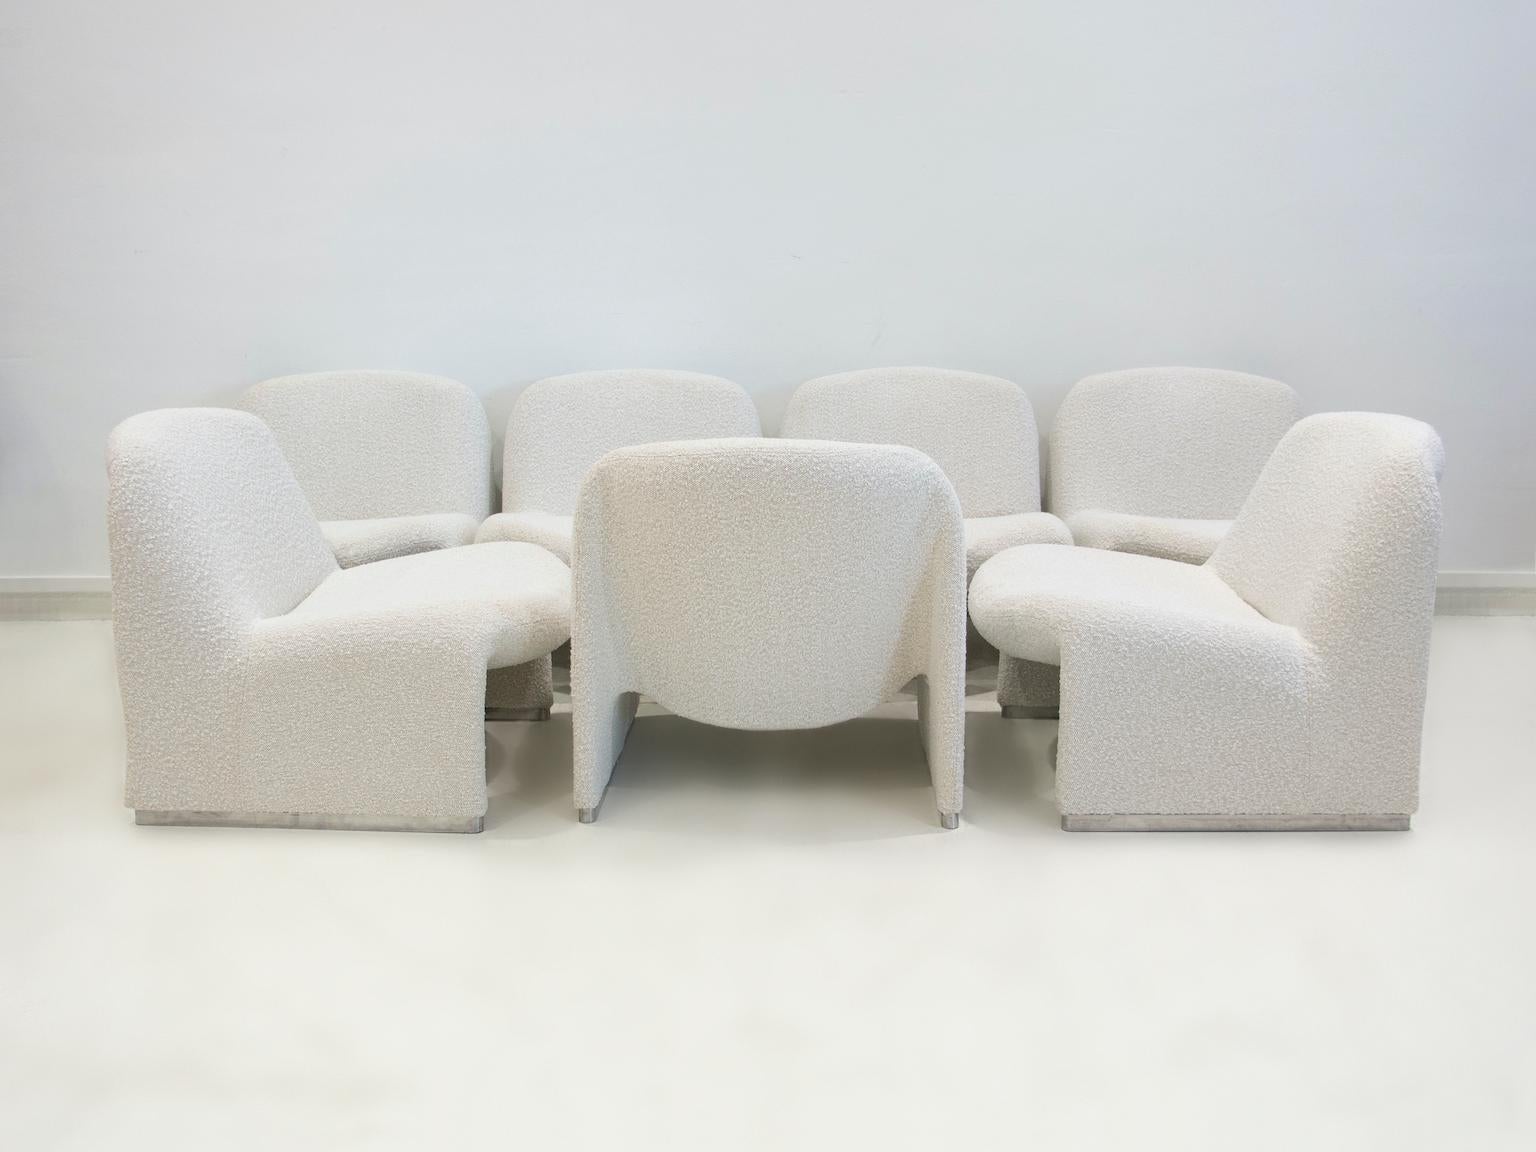 Five White Bouclé Fabric Upholstered Giancarlo Piretti Alky Easy Chairs In Good Condition For Sale In Madrid, ES